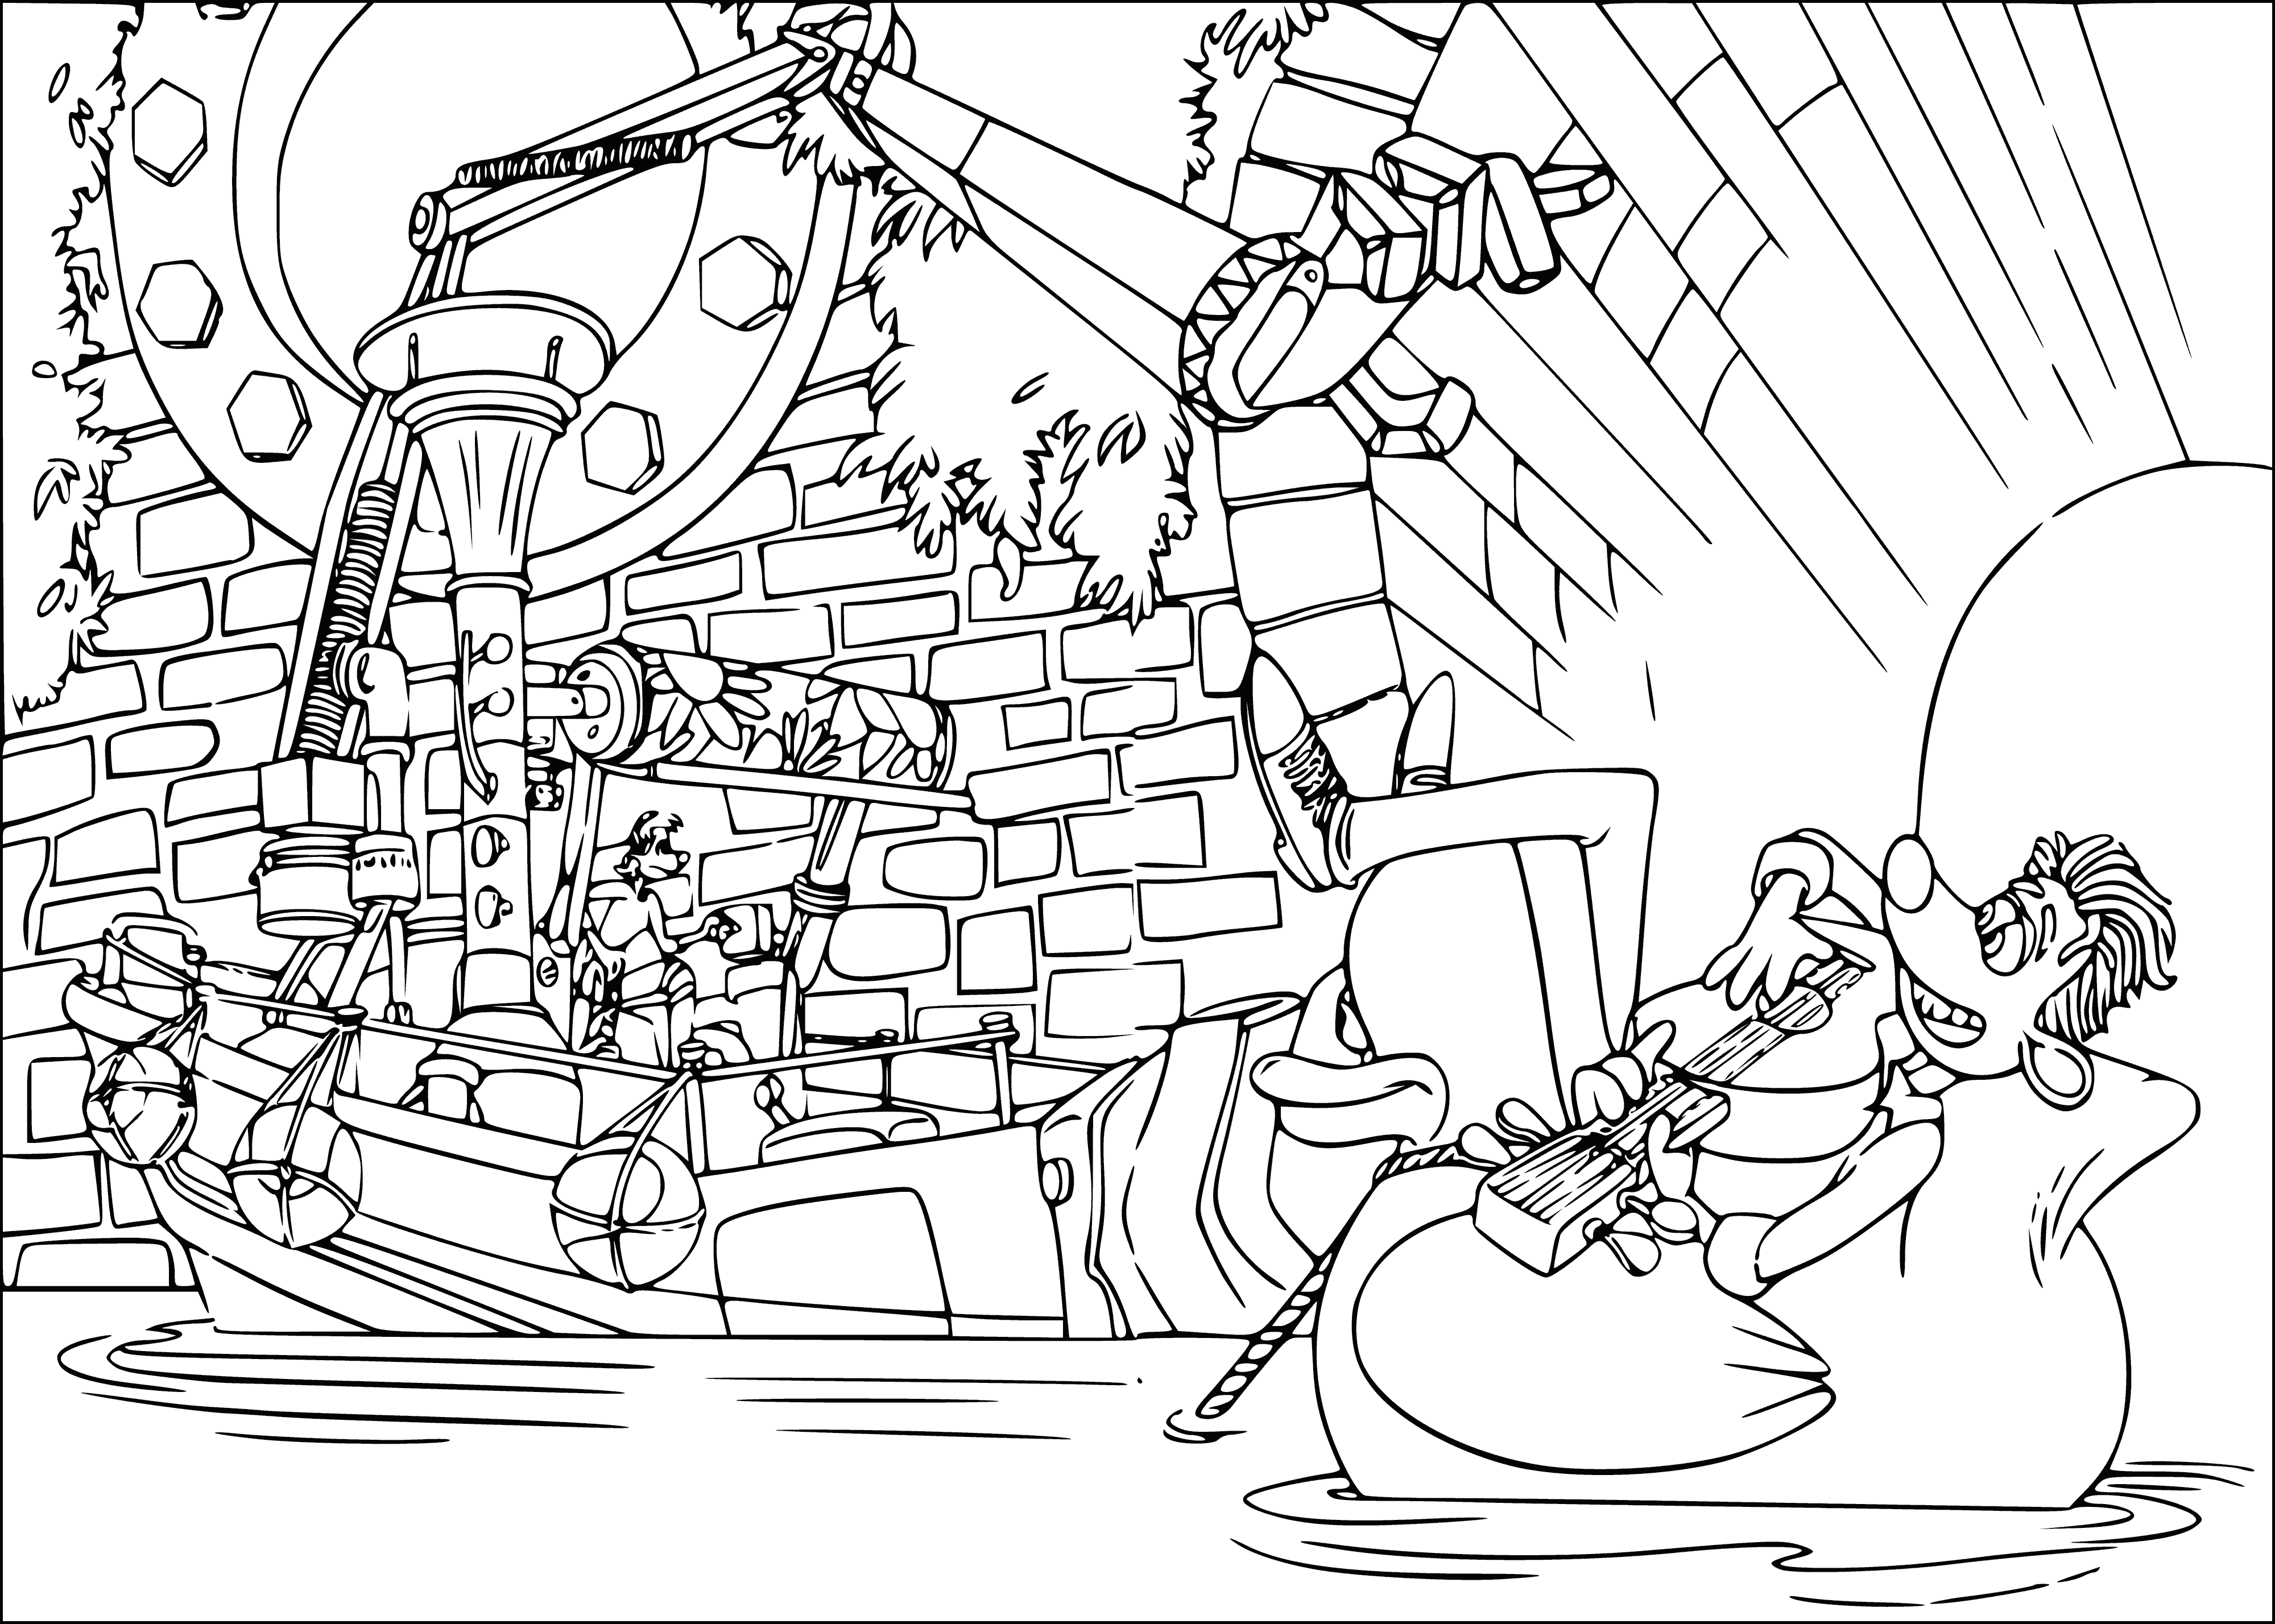 Roddy plays the guitar coloring page